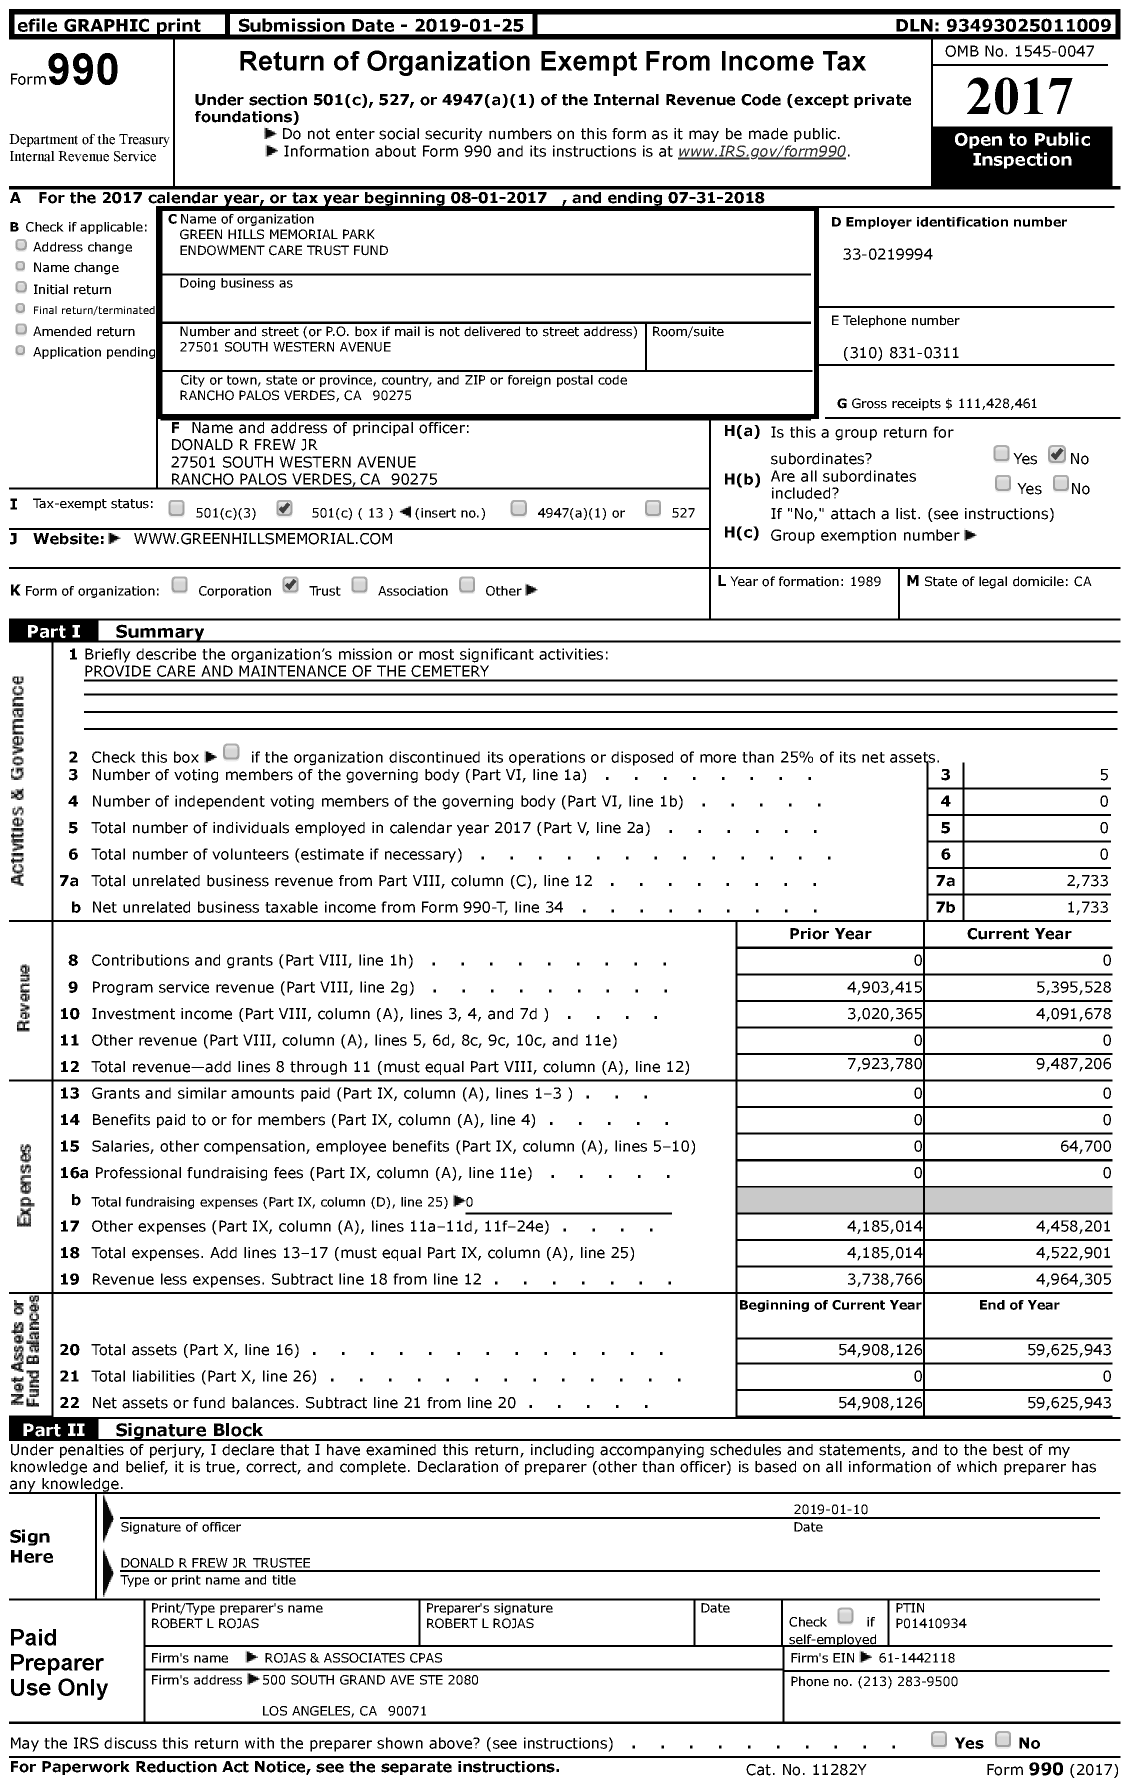 Image of first page of 2017 Form 990 for Green Hills Memorial Park Endowment Care Trust Fund